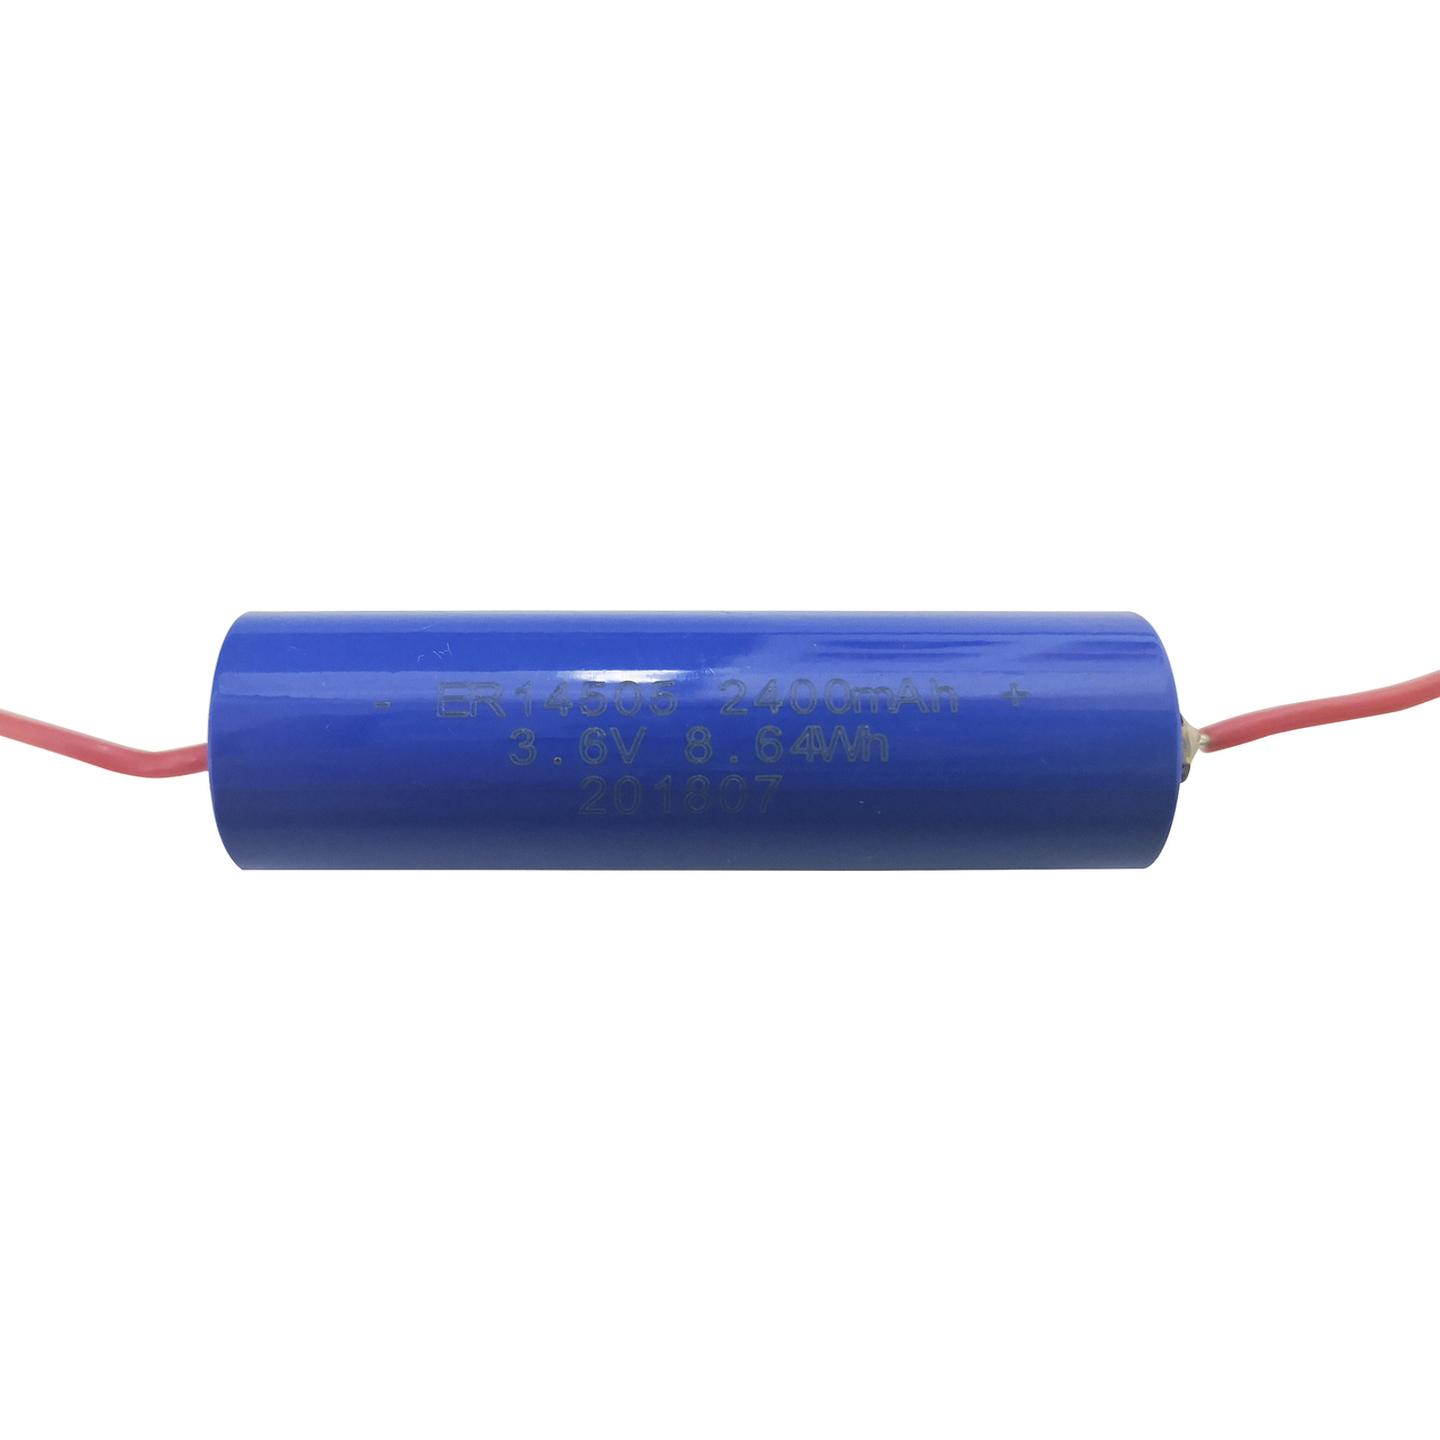 3.6V AA Lithium Battery - Axial